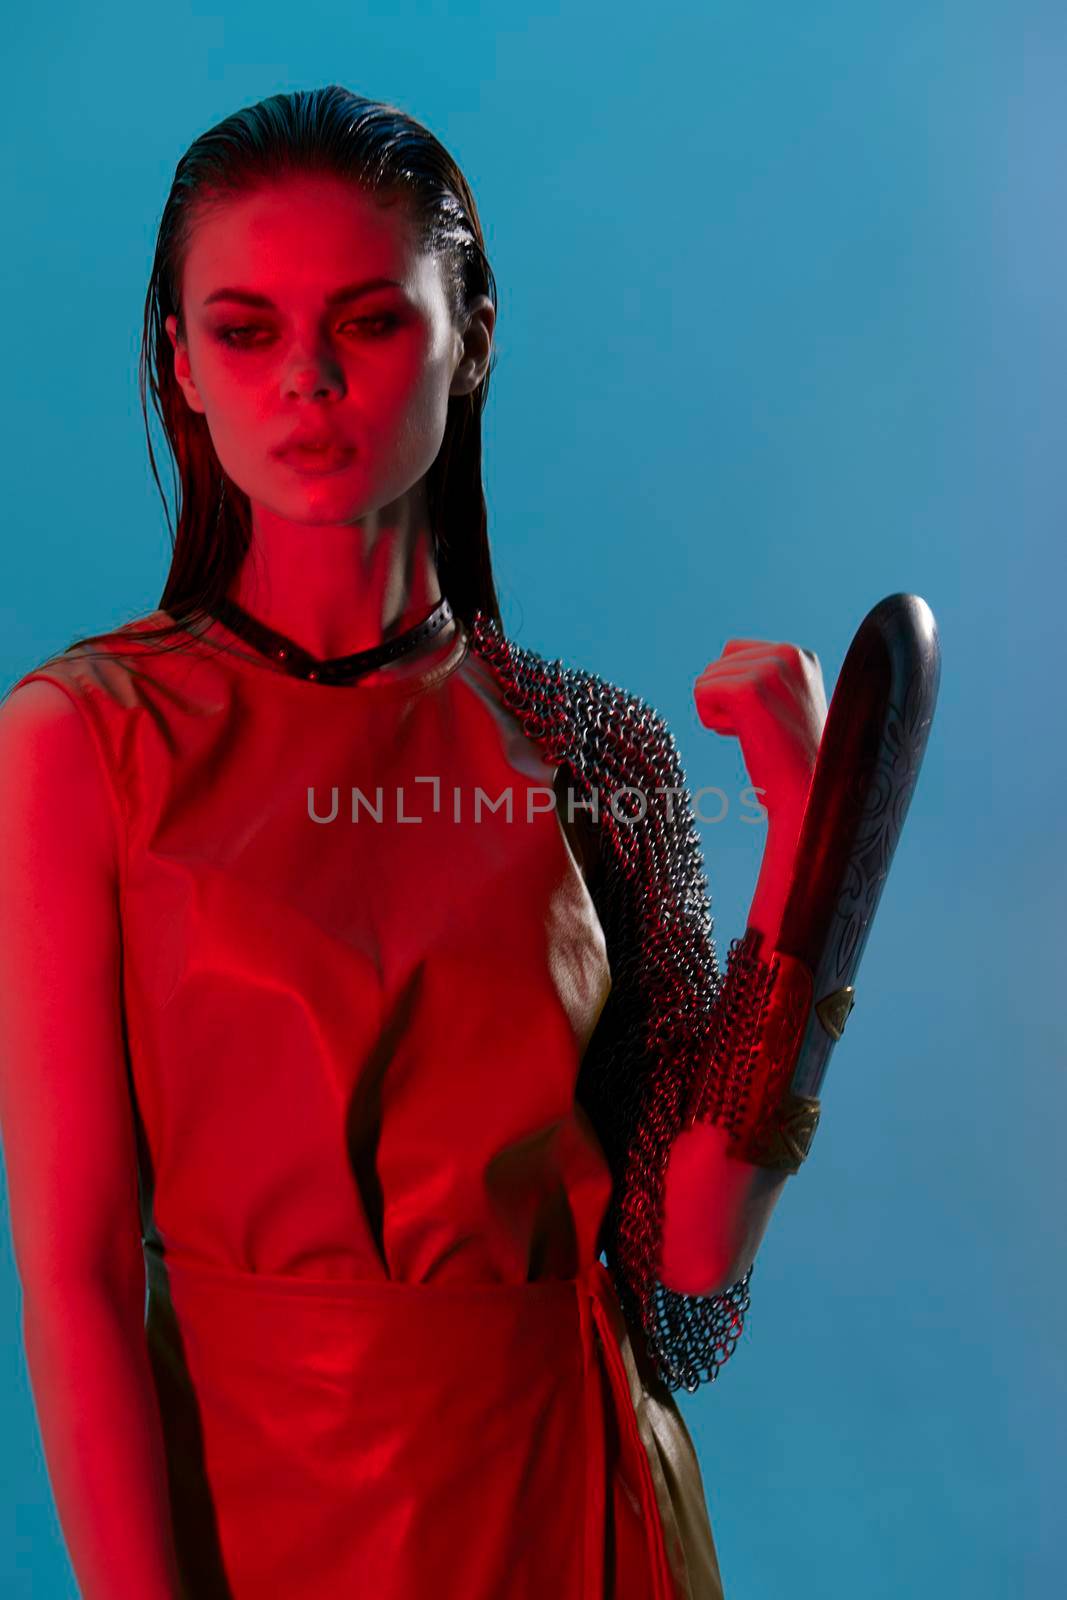 photo pretty woman Glamor posing red light metal armor on hand Lifestyle unaltered. High quality photo